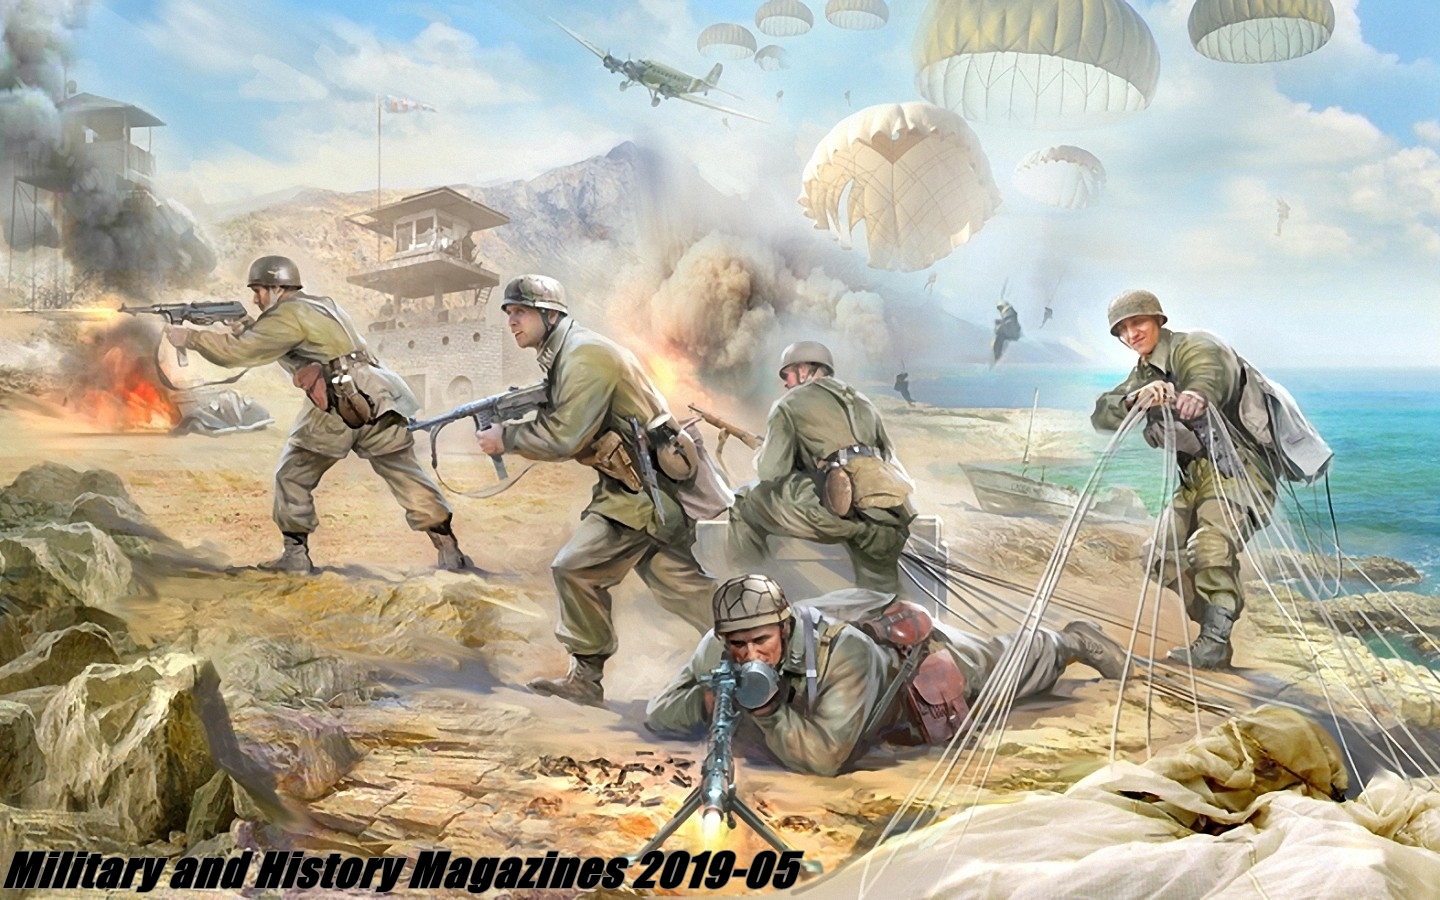 Military and History Magazines 2019-05